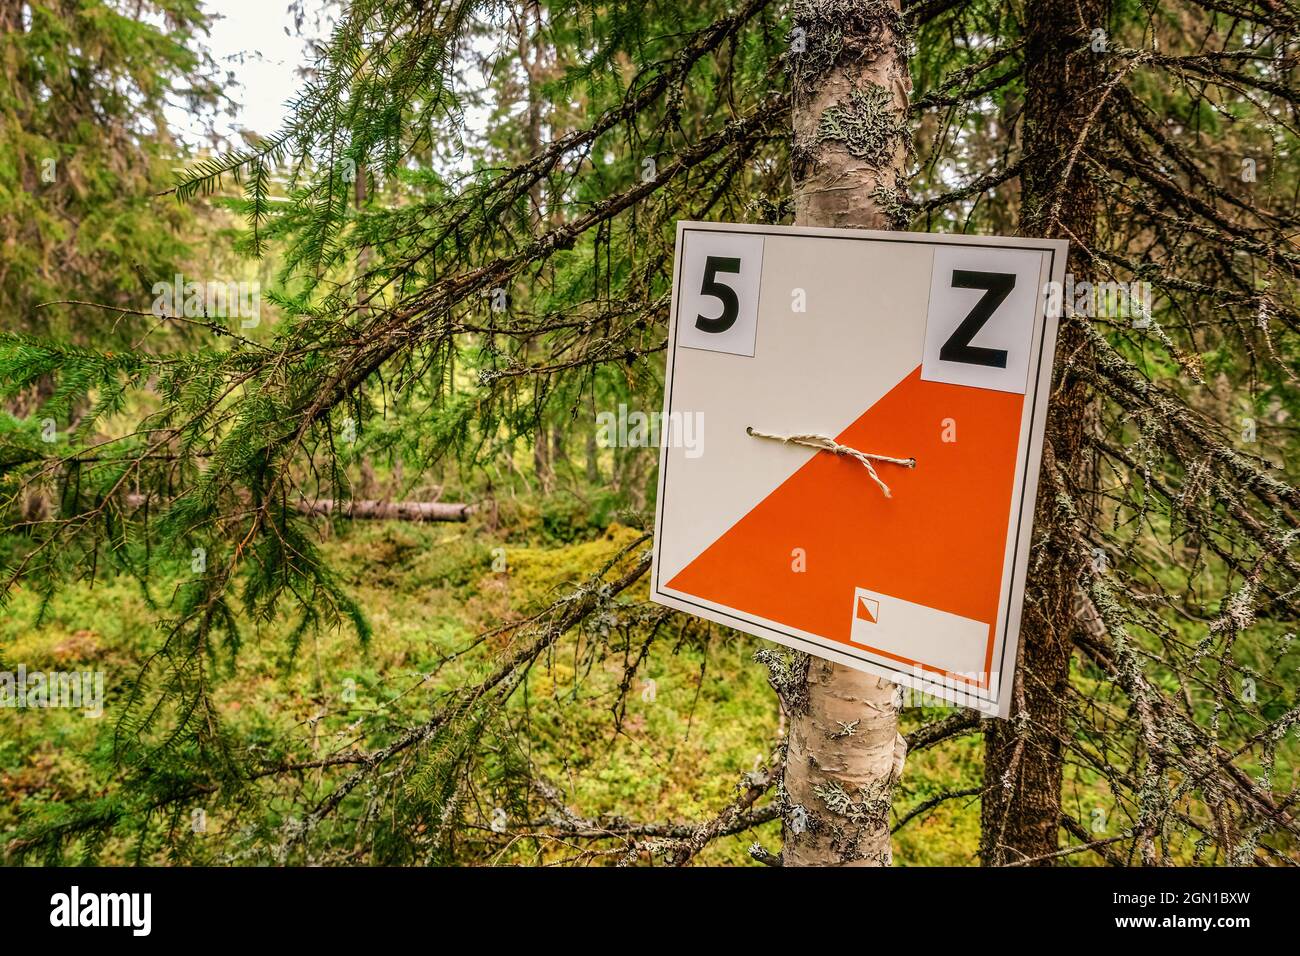 Orienteering check point activity, close up photo Stock Photo